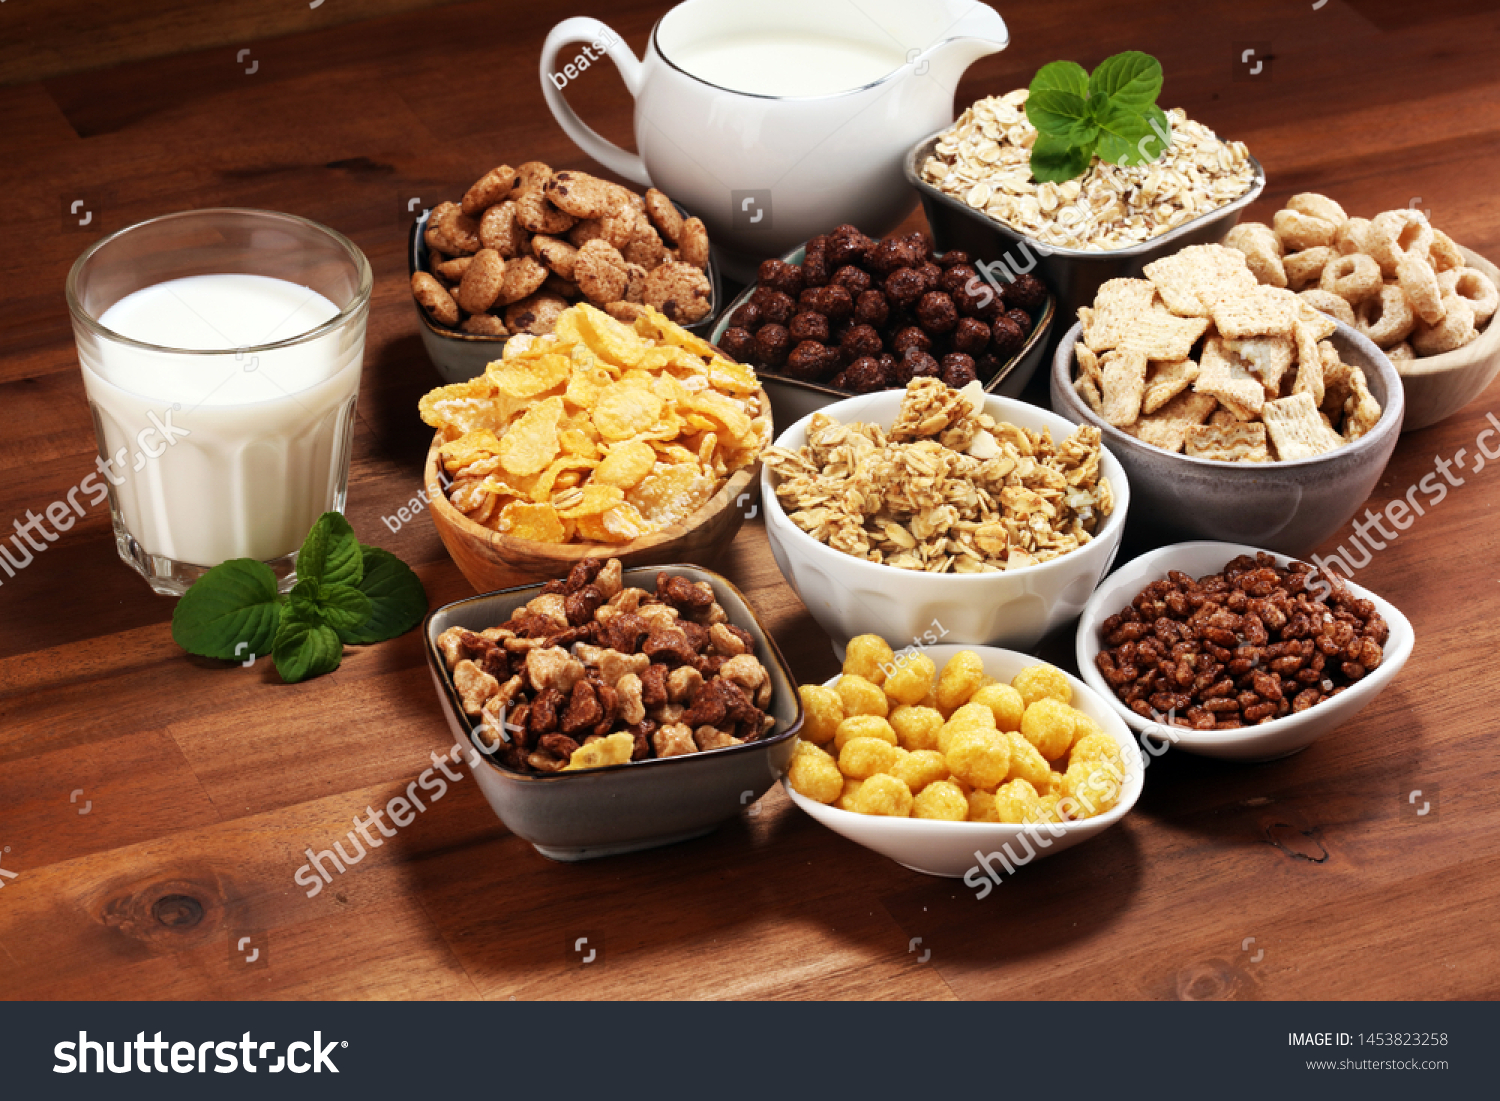 Cereal. Bowls of various cereals and milk for breakfast. Muesli with variety of kids cereals. #1453823258